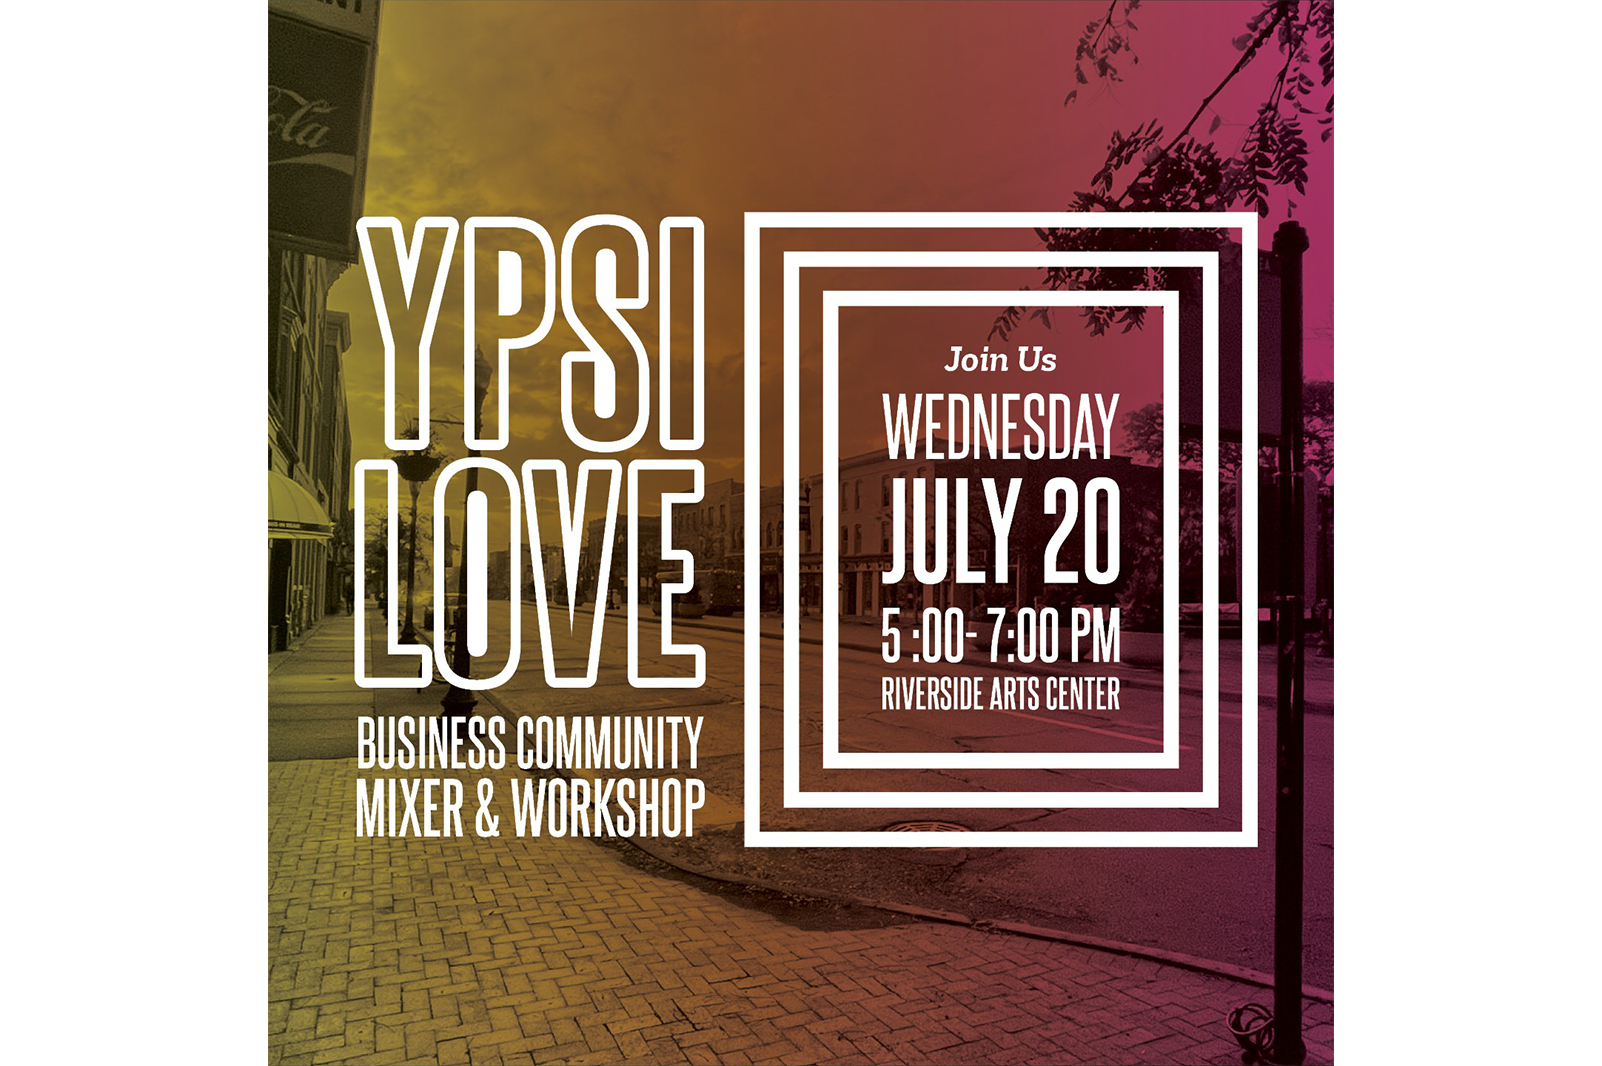 A flyer for the Downtown Association of Ypsilanti's recent Ypsi Love Mixer.